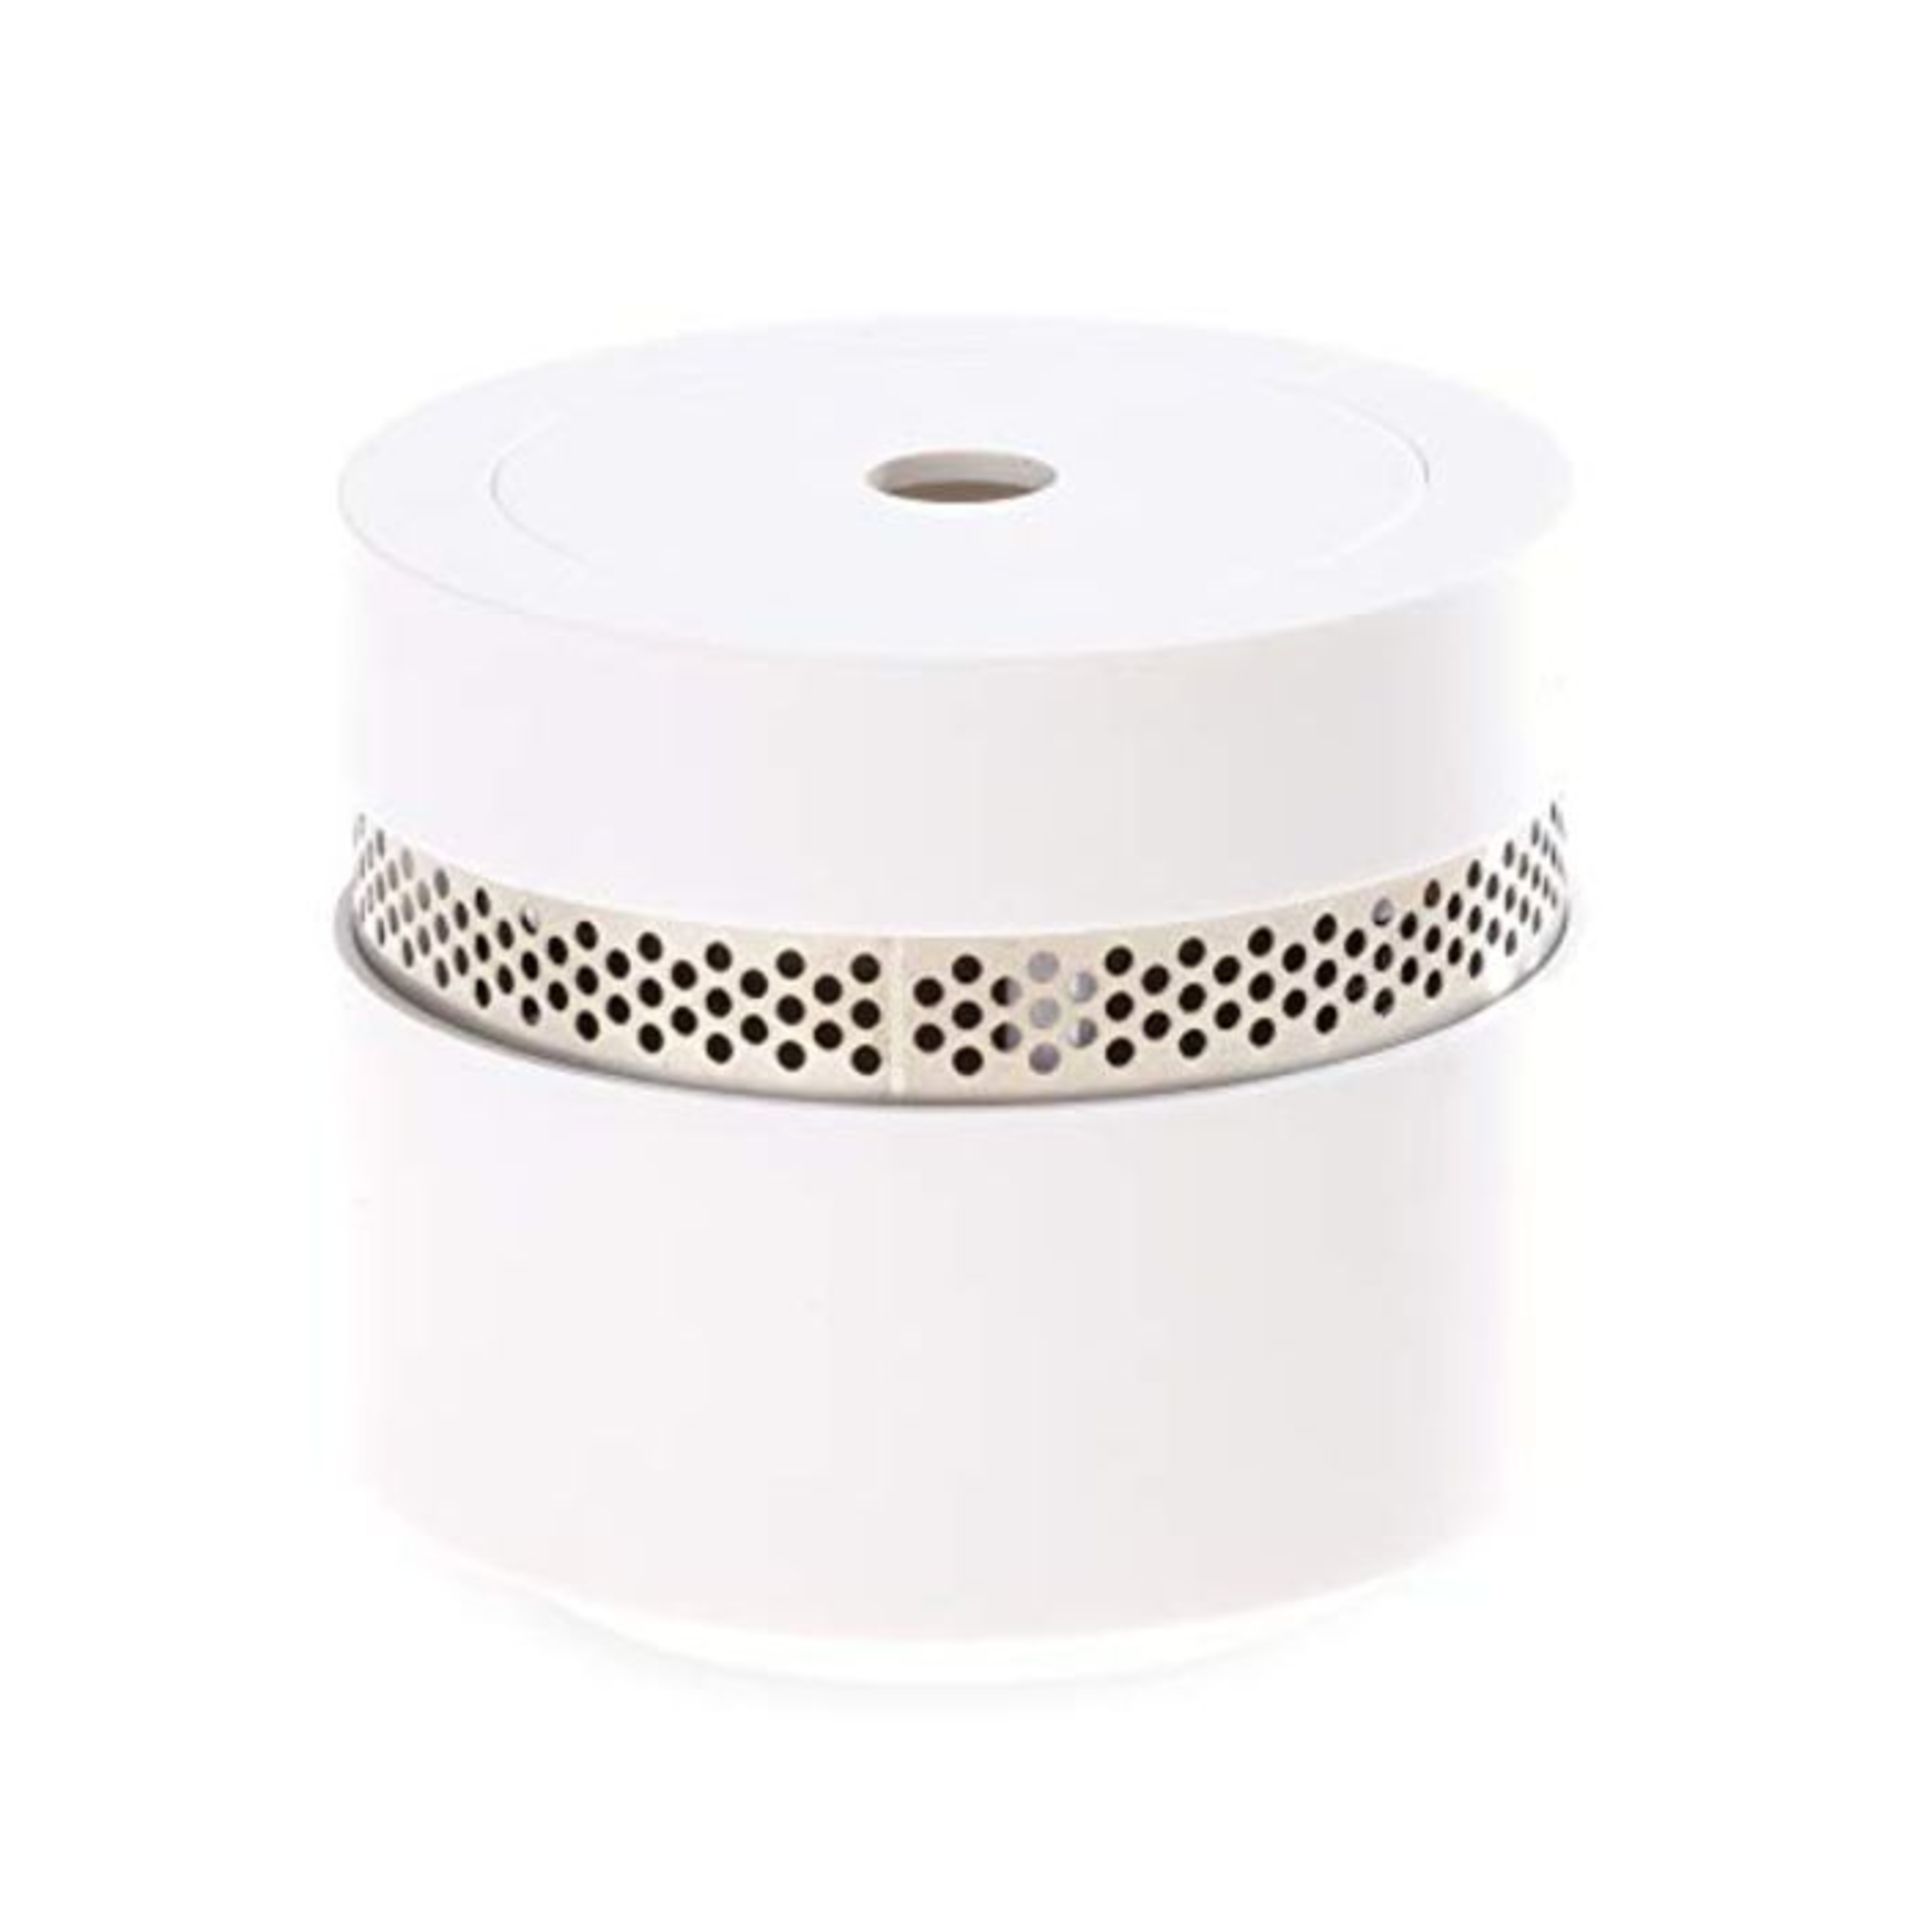 Smoke Detector Mini Fumo ? Design Home Fire Alarm Extra-Small by REV ? 10 Year Battery